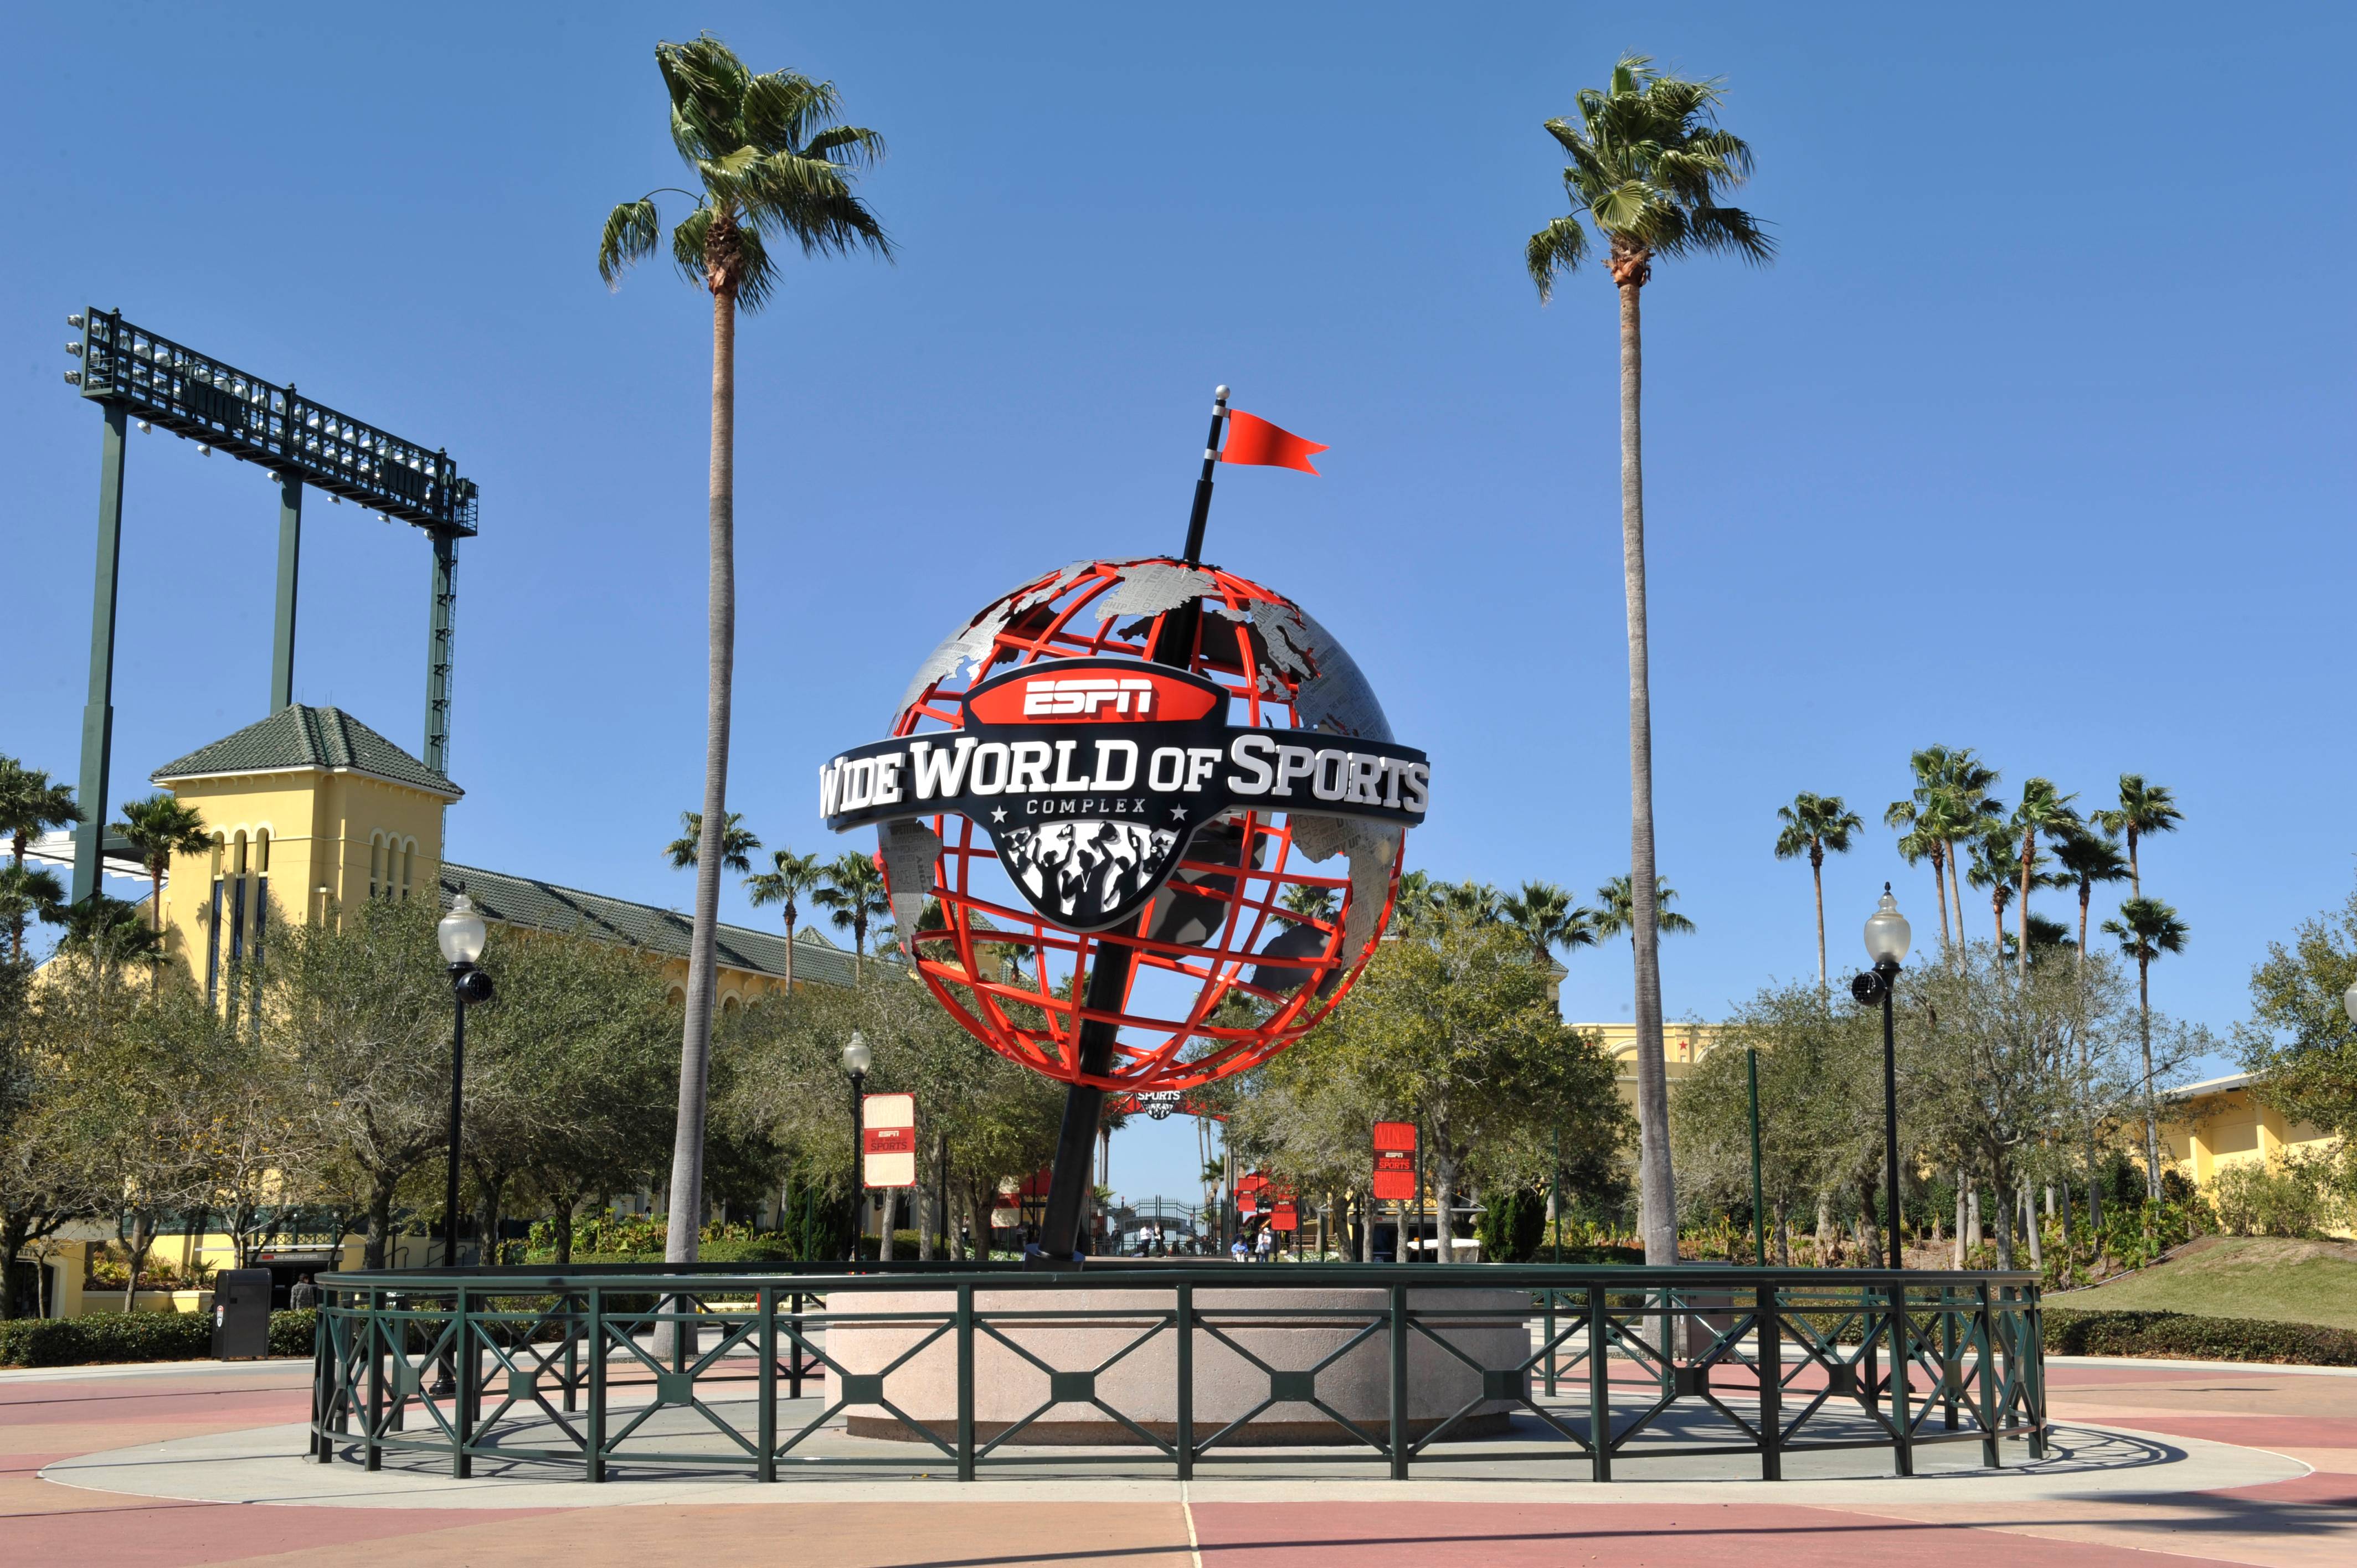 Disney's Wide World of Sports receives industry recognition